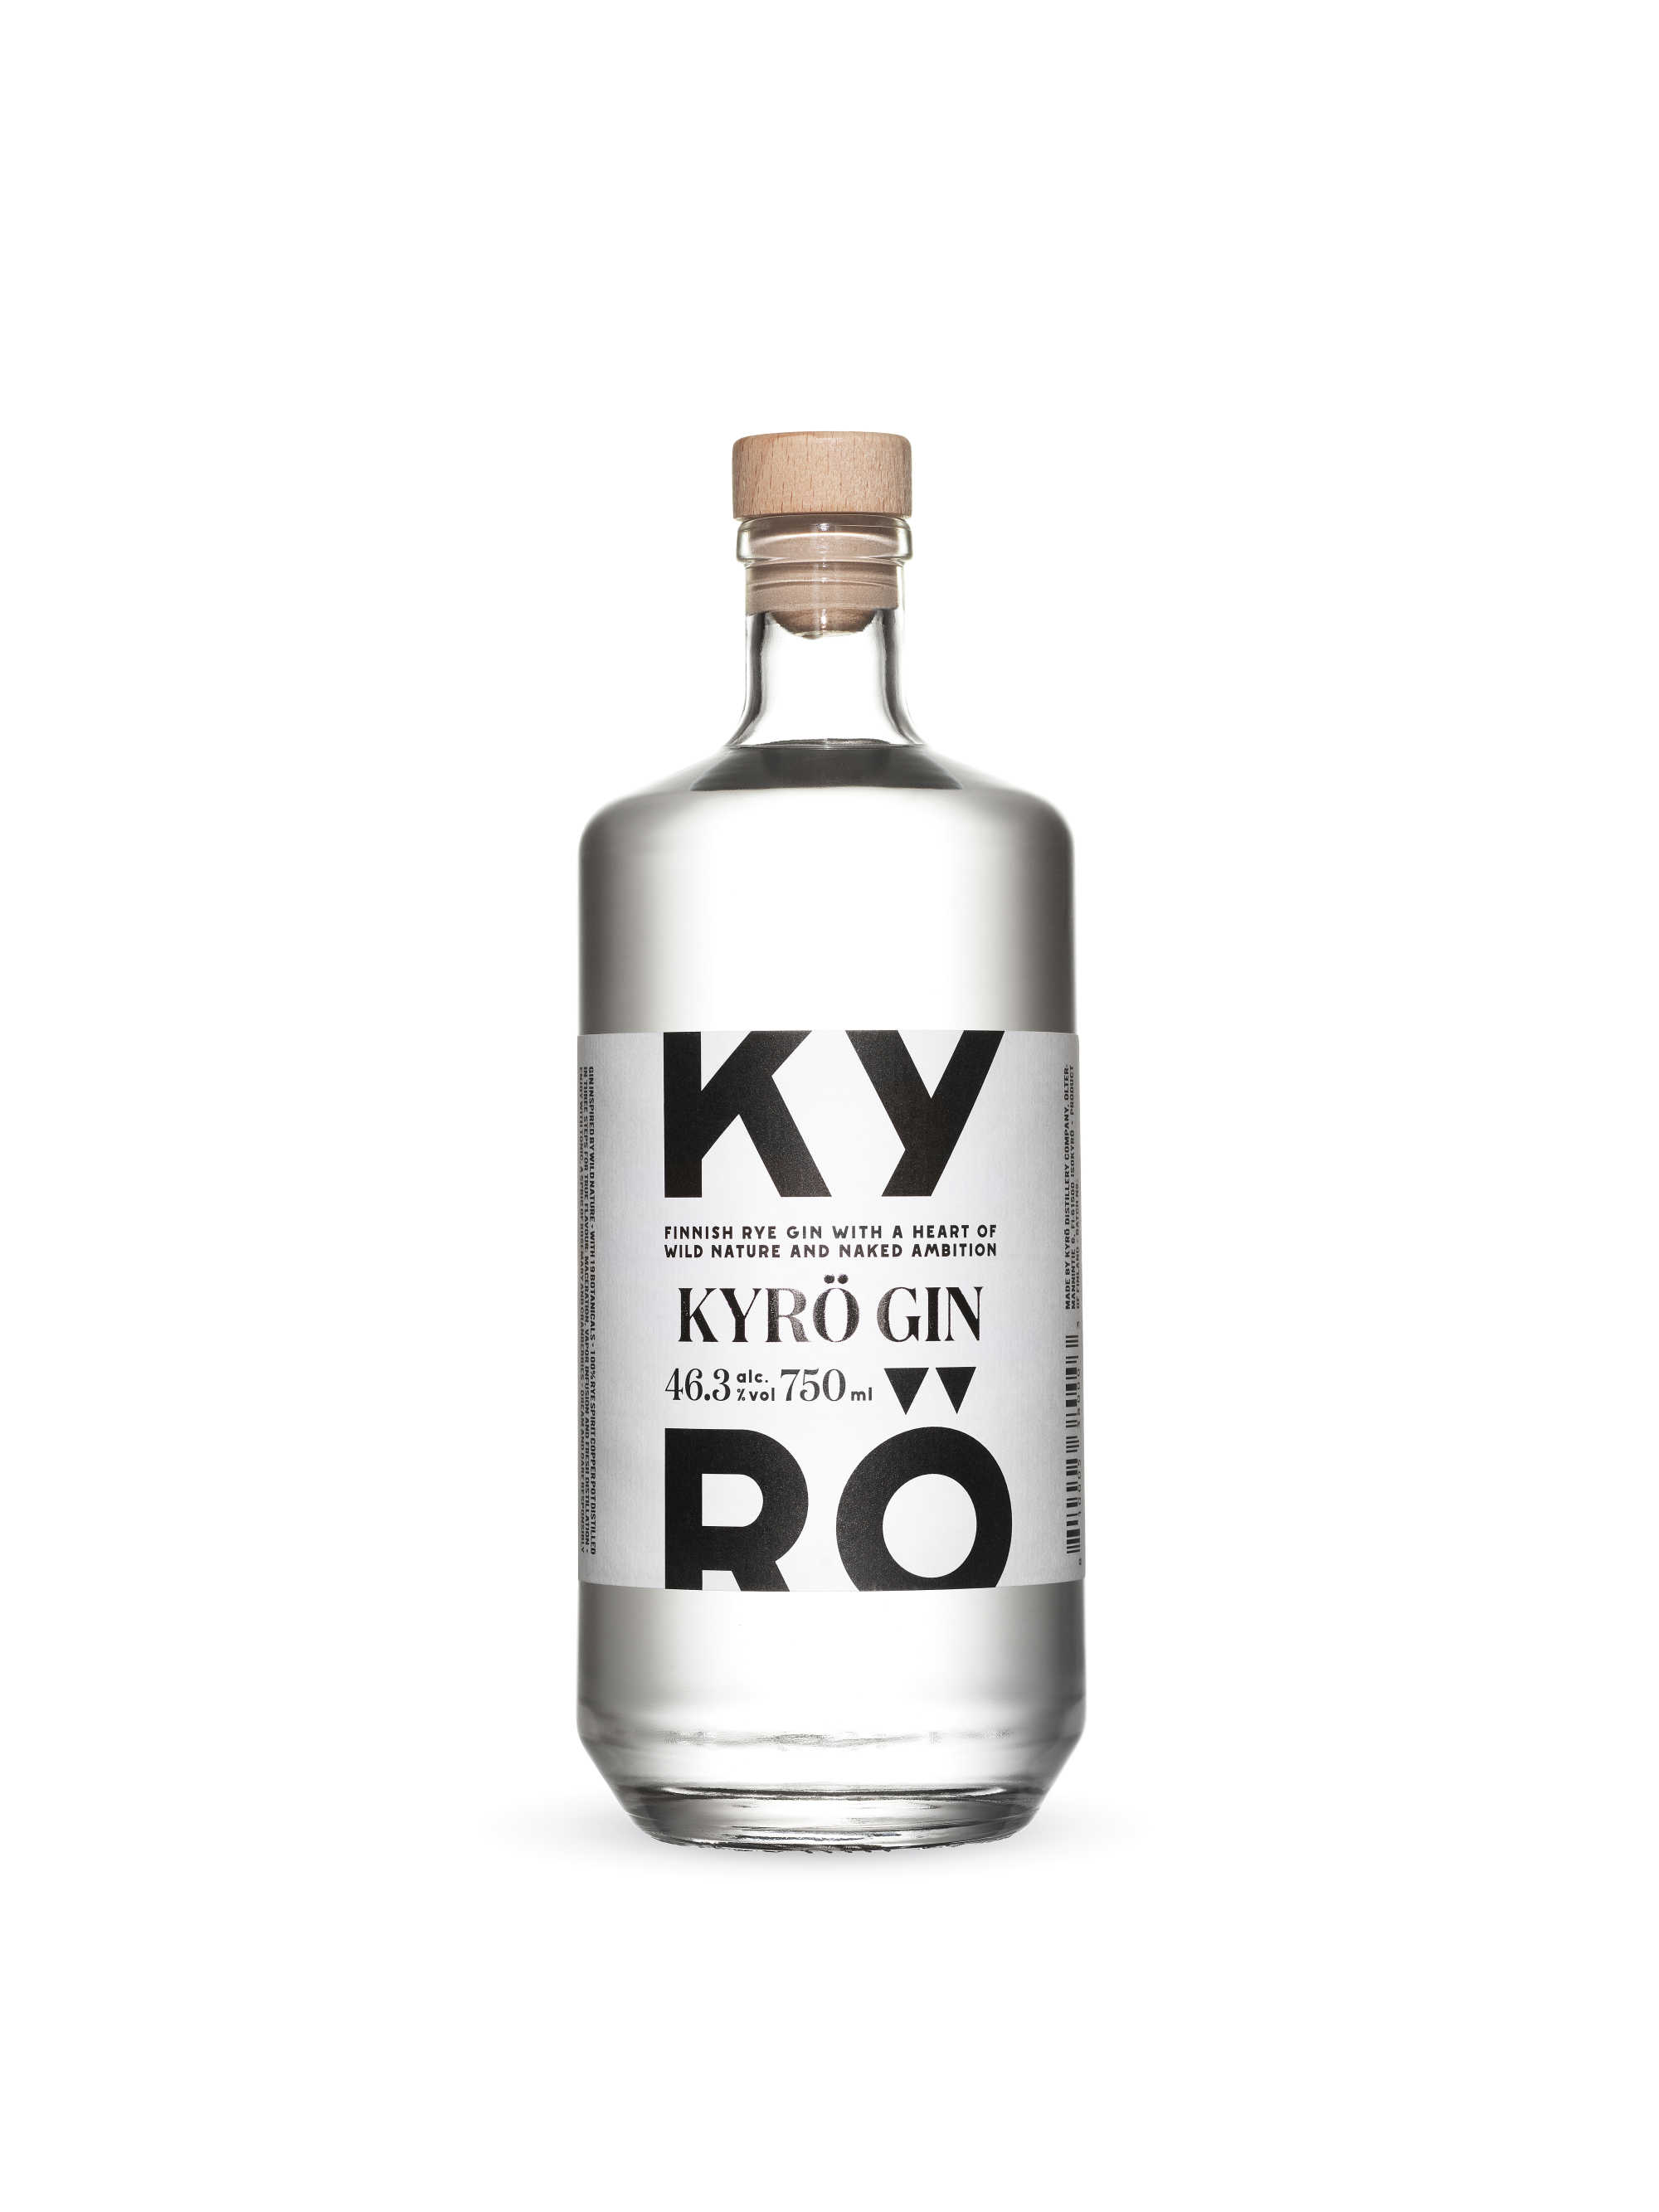 Product photo: 750 ml bottle of Kyrö Gin.